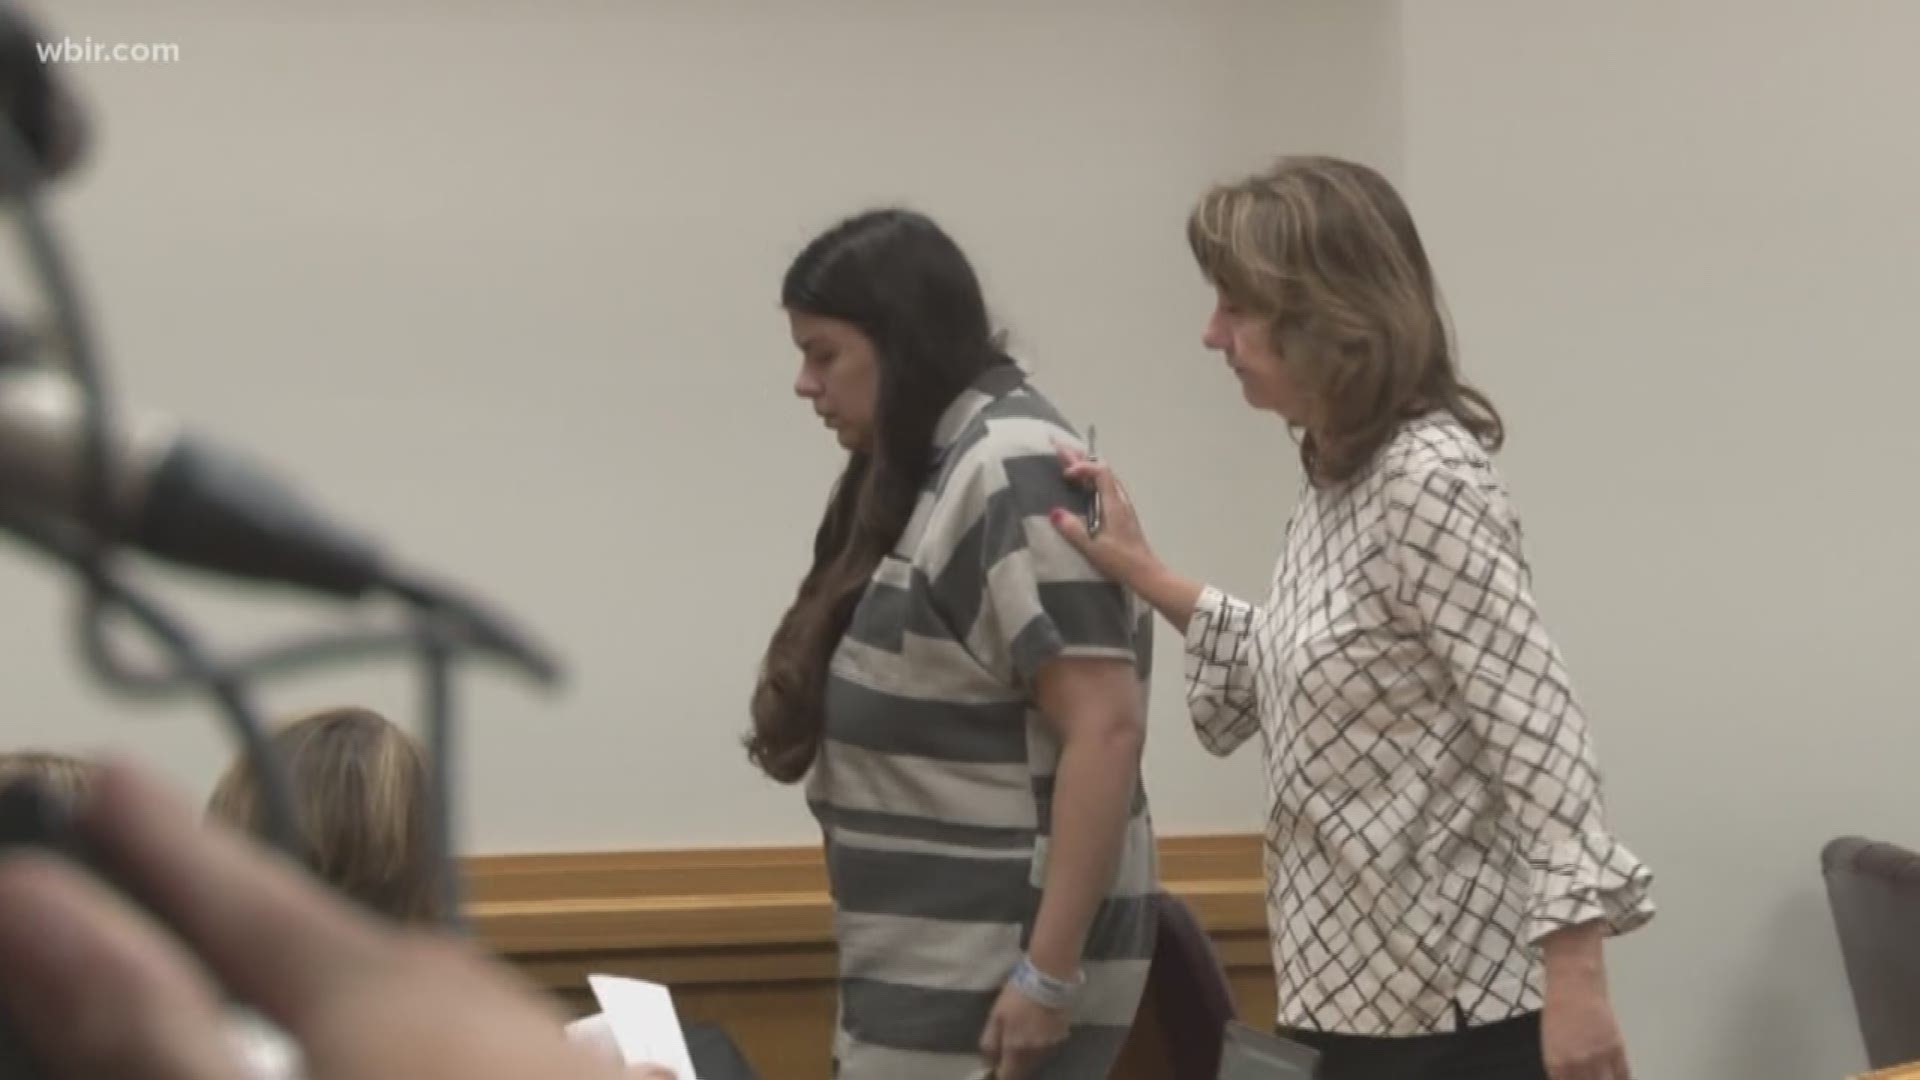 The mom charged with aggravated neglect after her two children were found unresponsive in a bathtub appeared in court Wednesday.